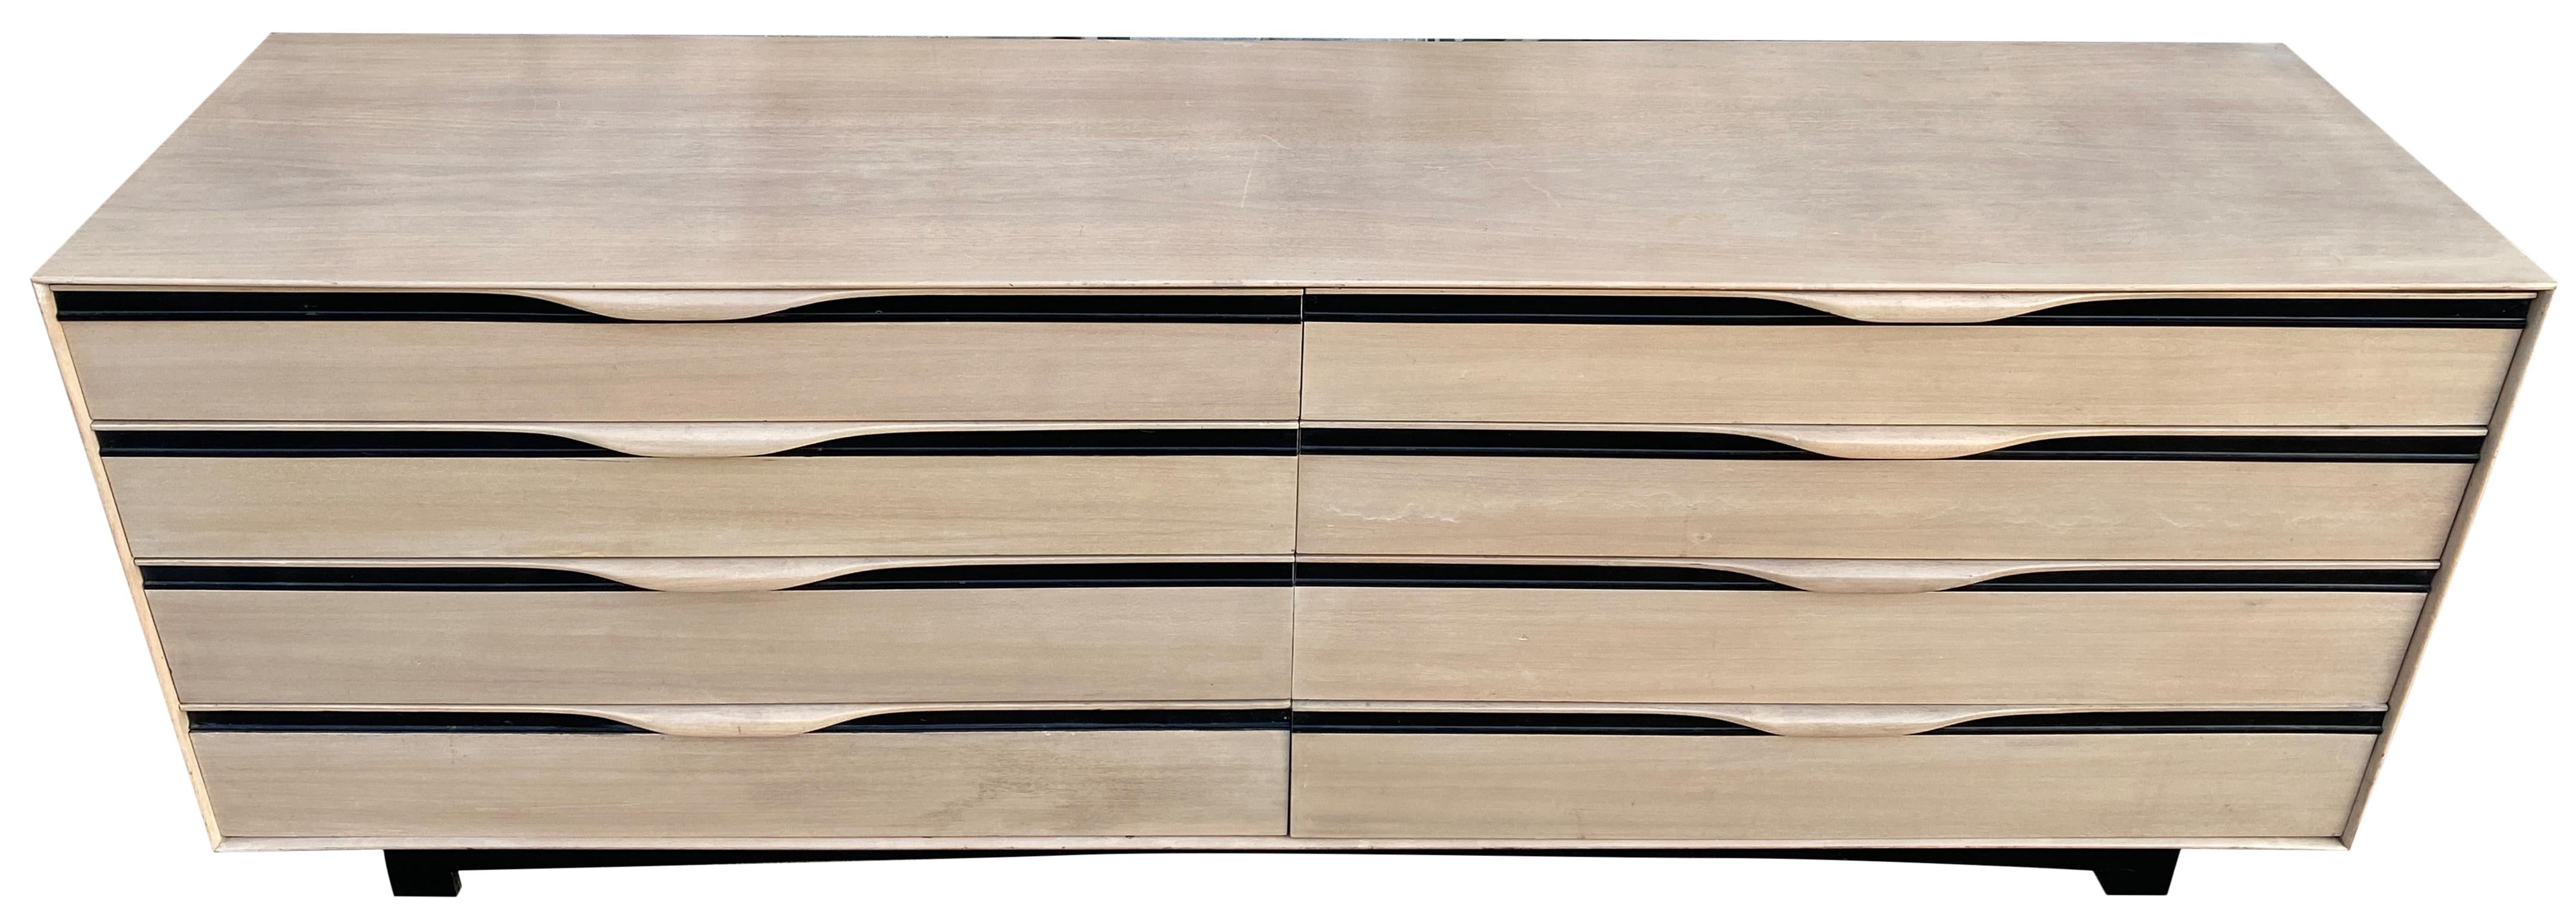 Midcentury John Kapel for Glenn of California long off white washed walnut wood and black lacquer dresser credenza. All original dresser credenza with removable drawer dividers. Beautiful sculpted handles. All drawers are on metal glides very